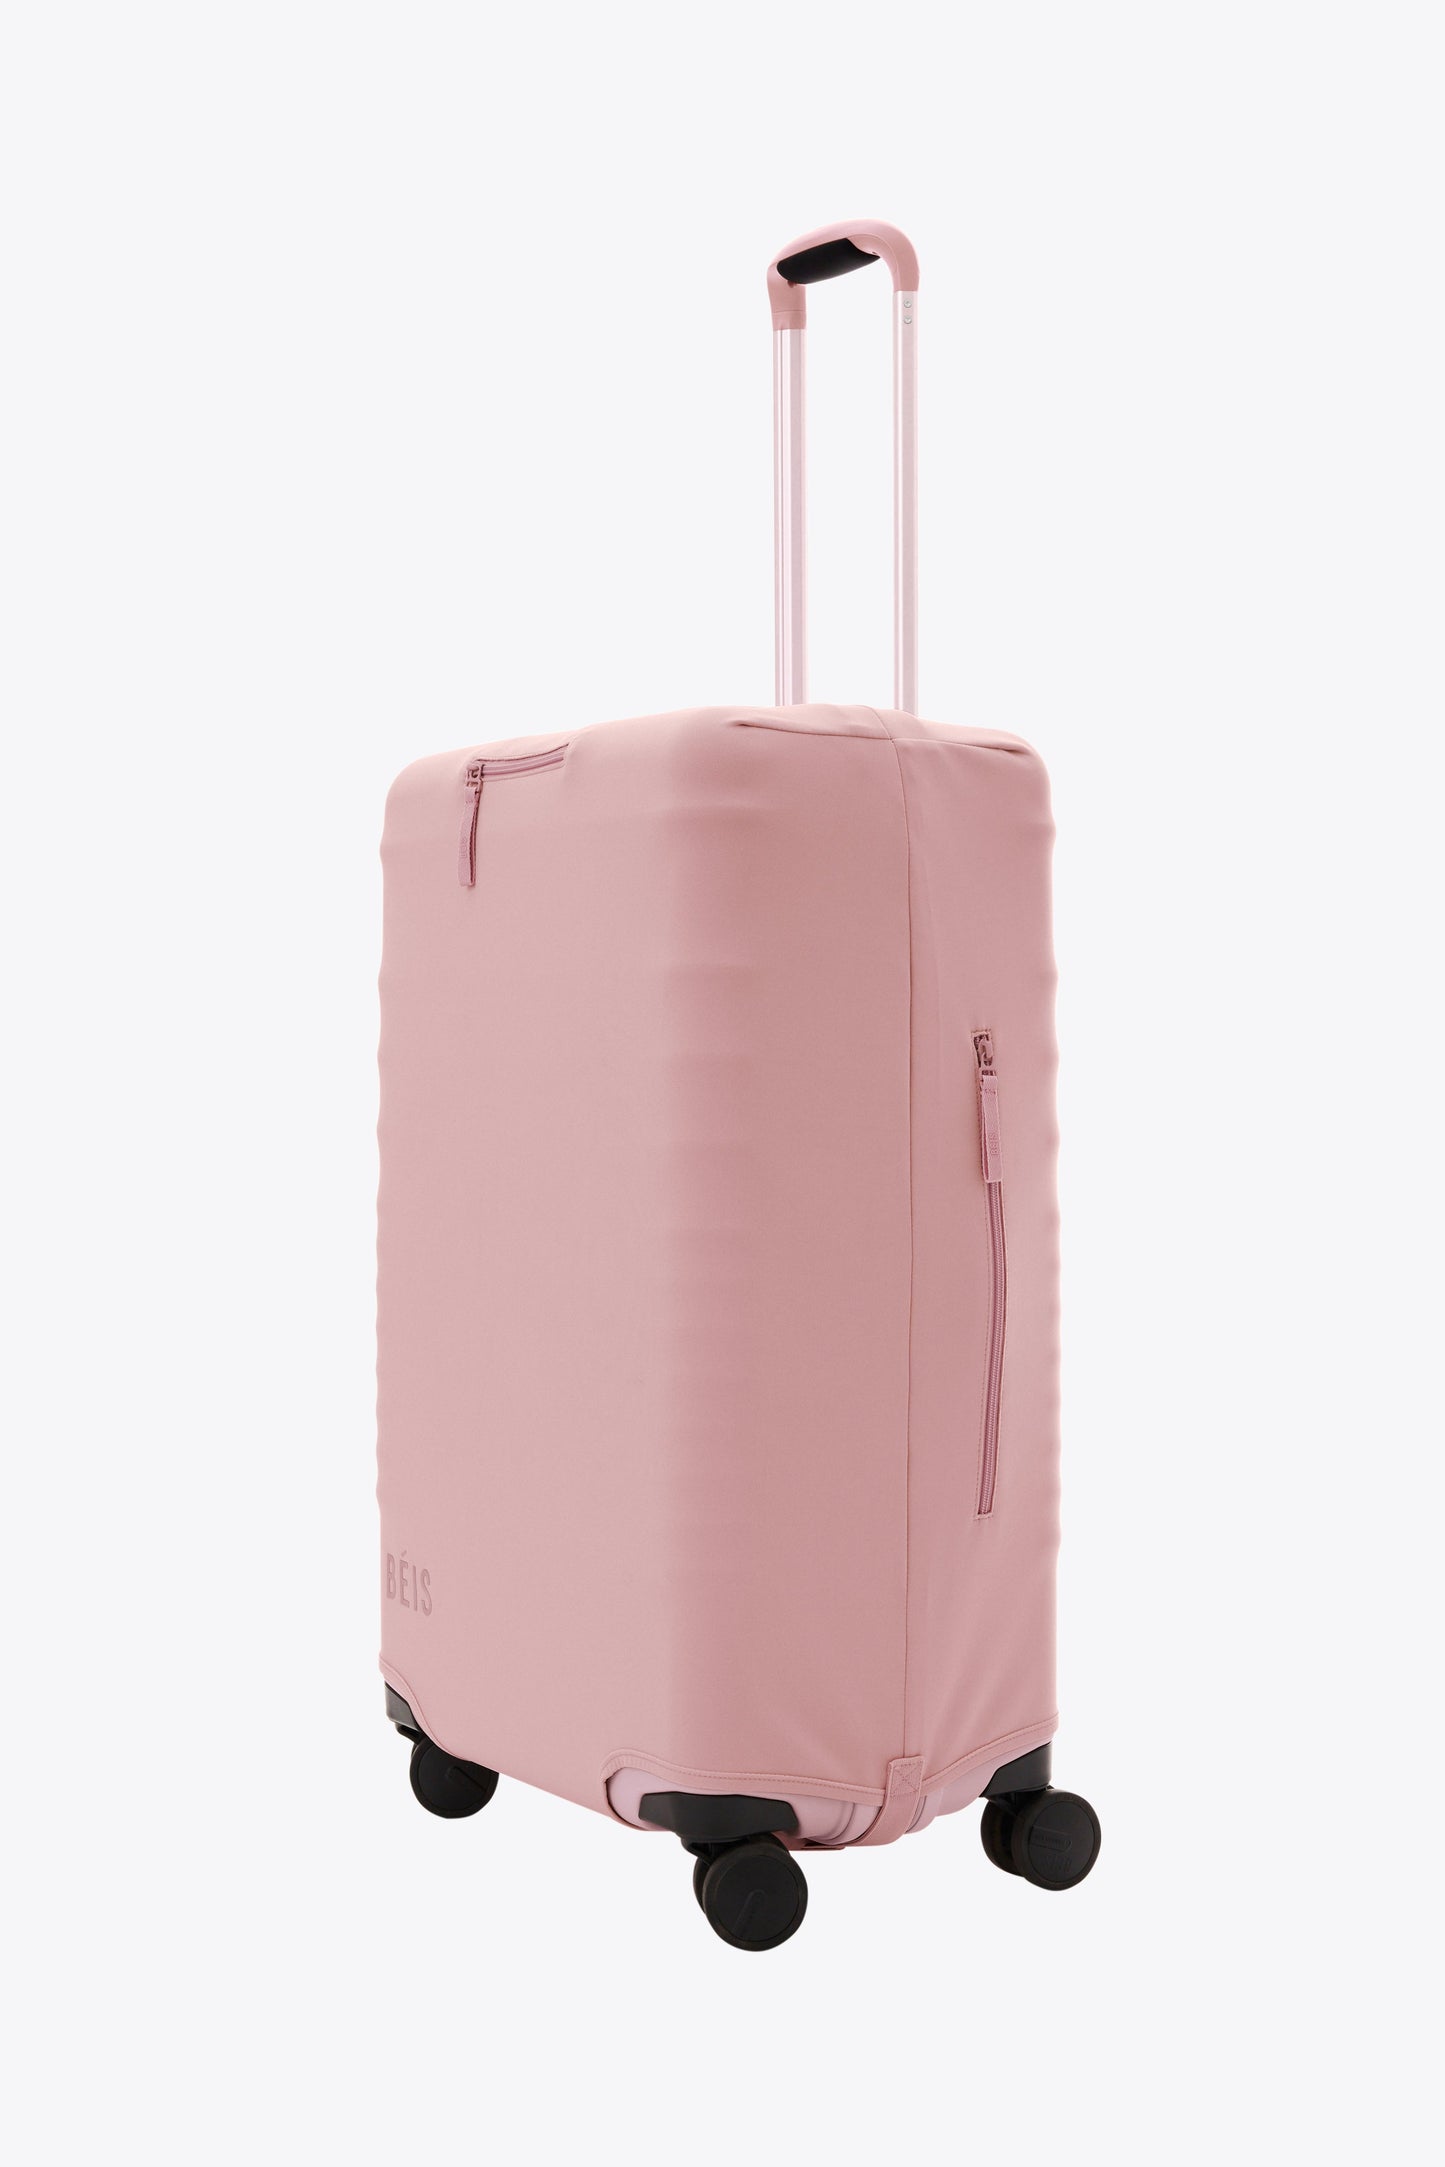 The Large Check-In Luggage Cover in Atlas Pink